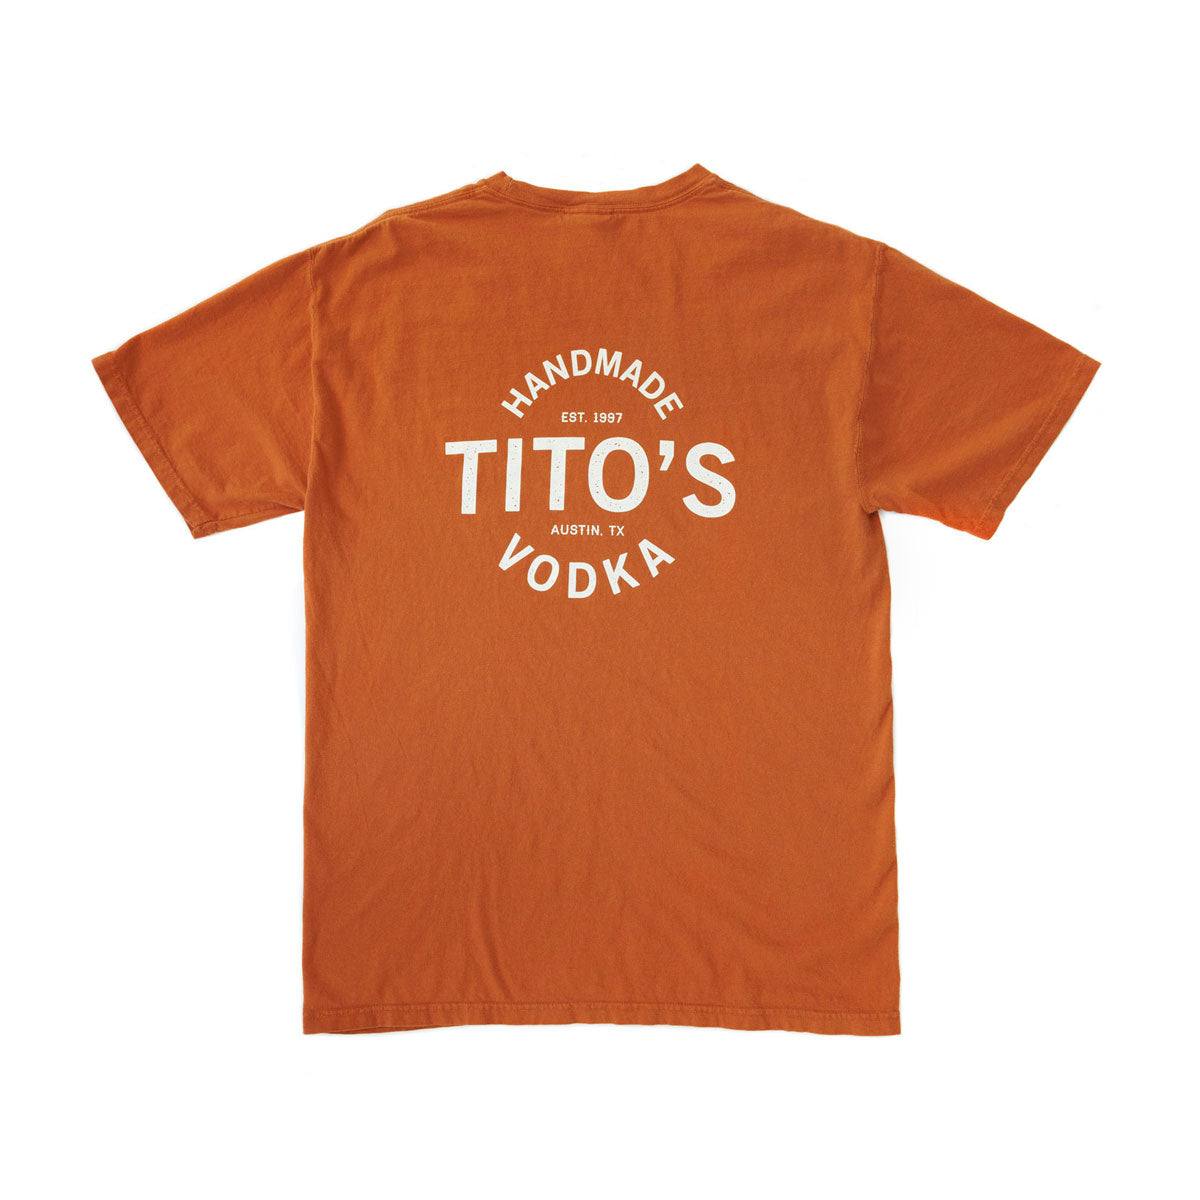 Back of orange short-sleeved t-shirt with large design of Tito's Handmade Vodka, est. 1997, and Austin, TX